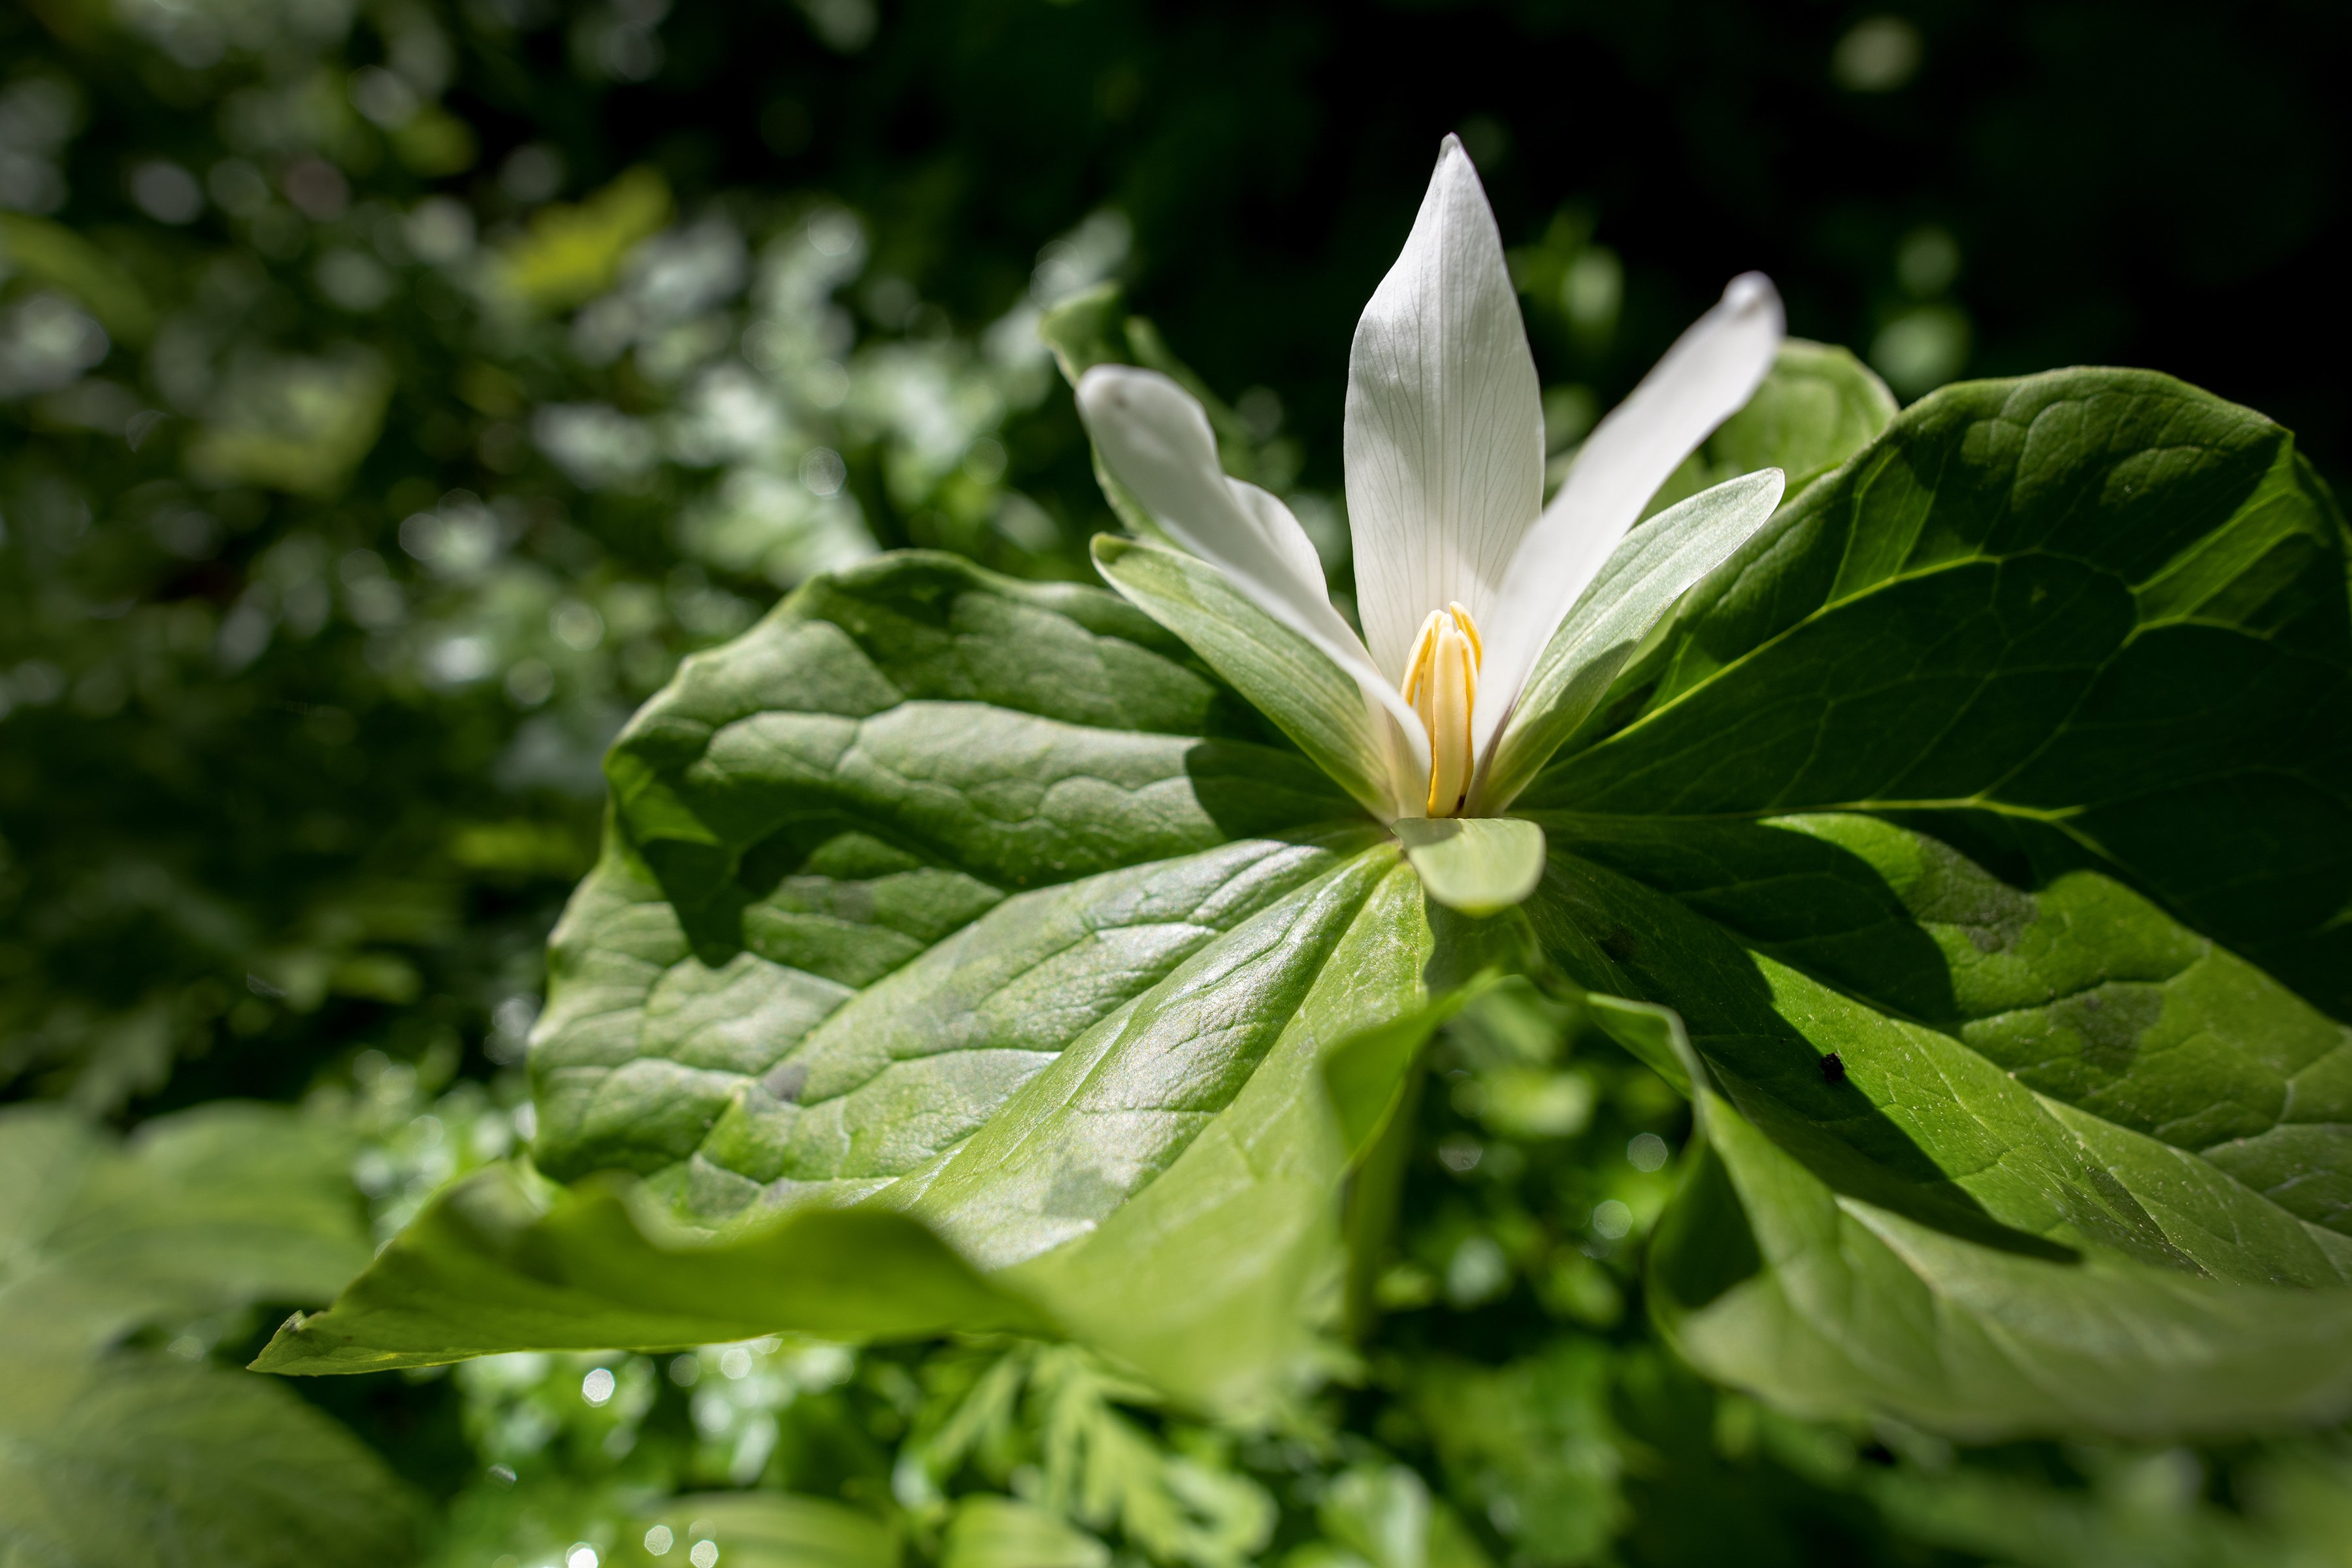 Trillium Plant: An Age-Old Ally That Needs Our Help